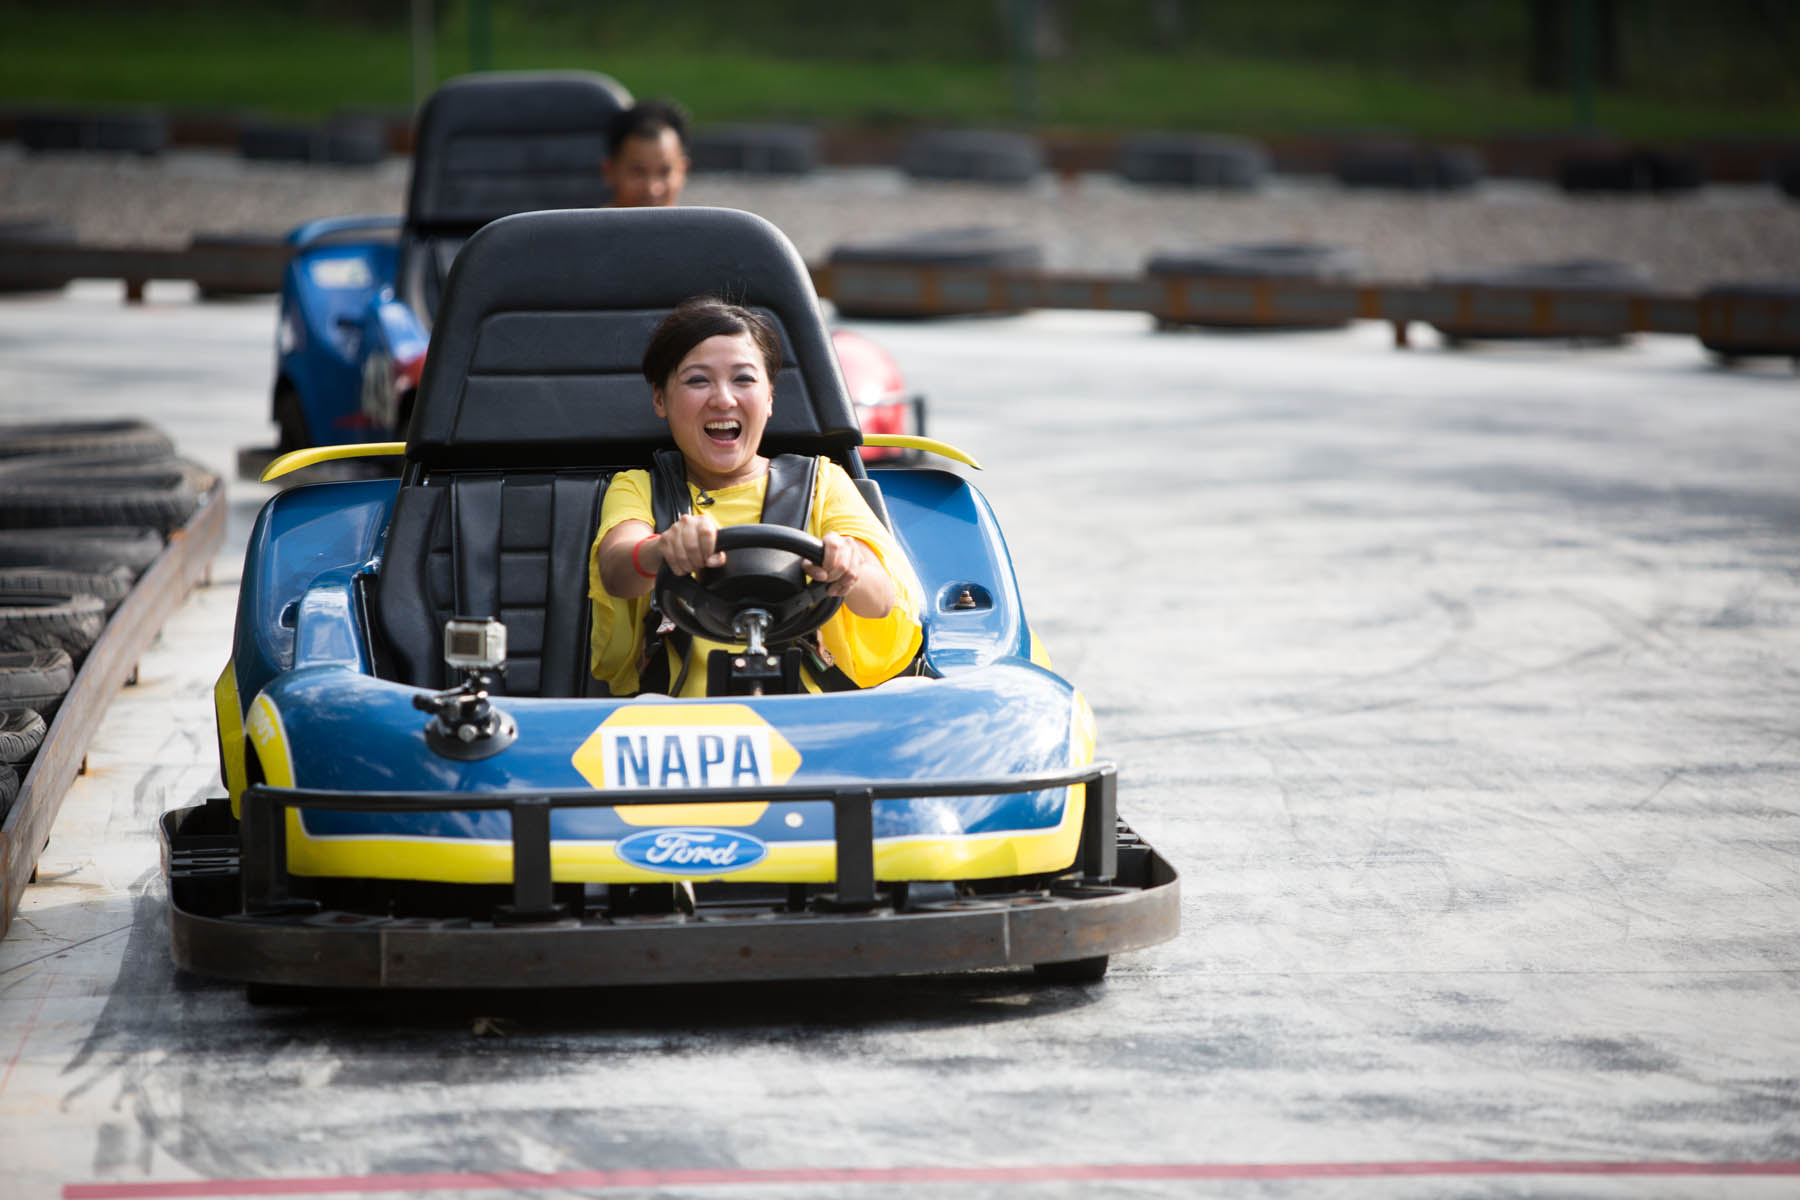 Karting 101: What is Go Karting & How To Drive a Go Kart